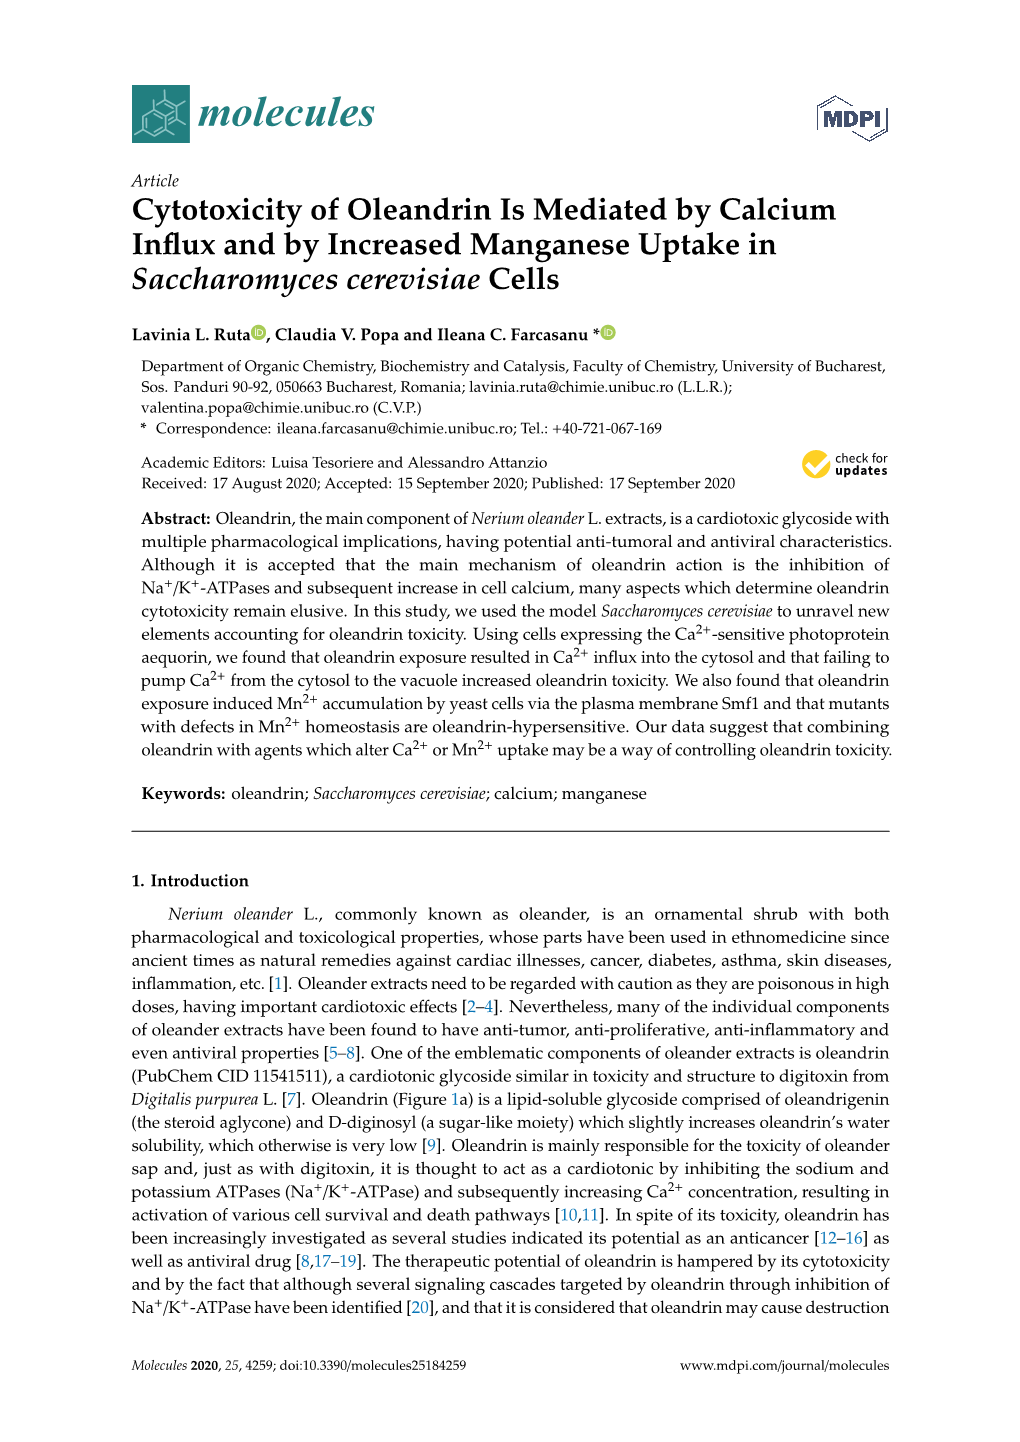 Cytotoxicity of Oleandrin Is Mediated by Calcium Influx and by Increased Manganese Uptake in Saccharomyces Cerevisiae Cells